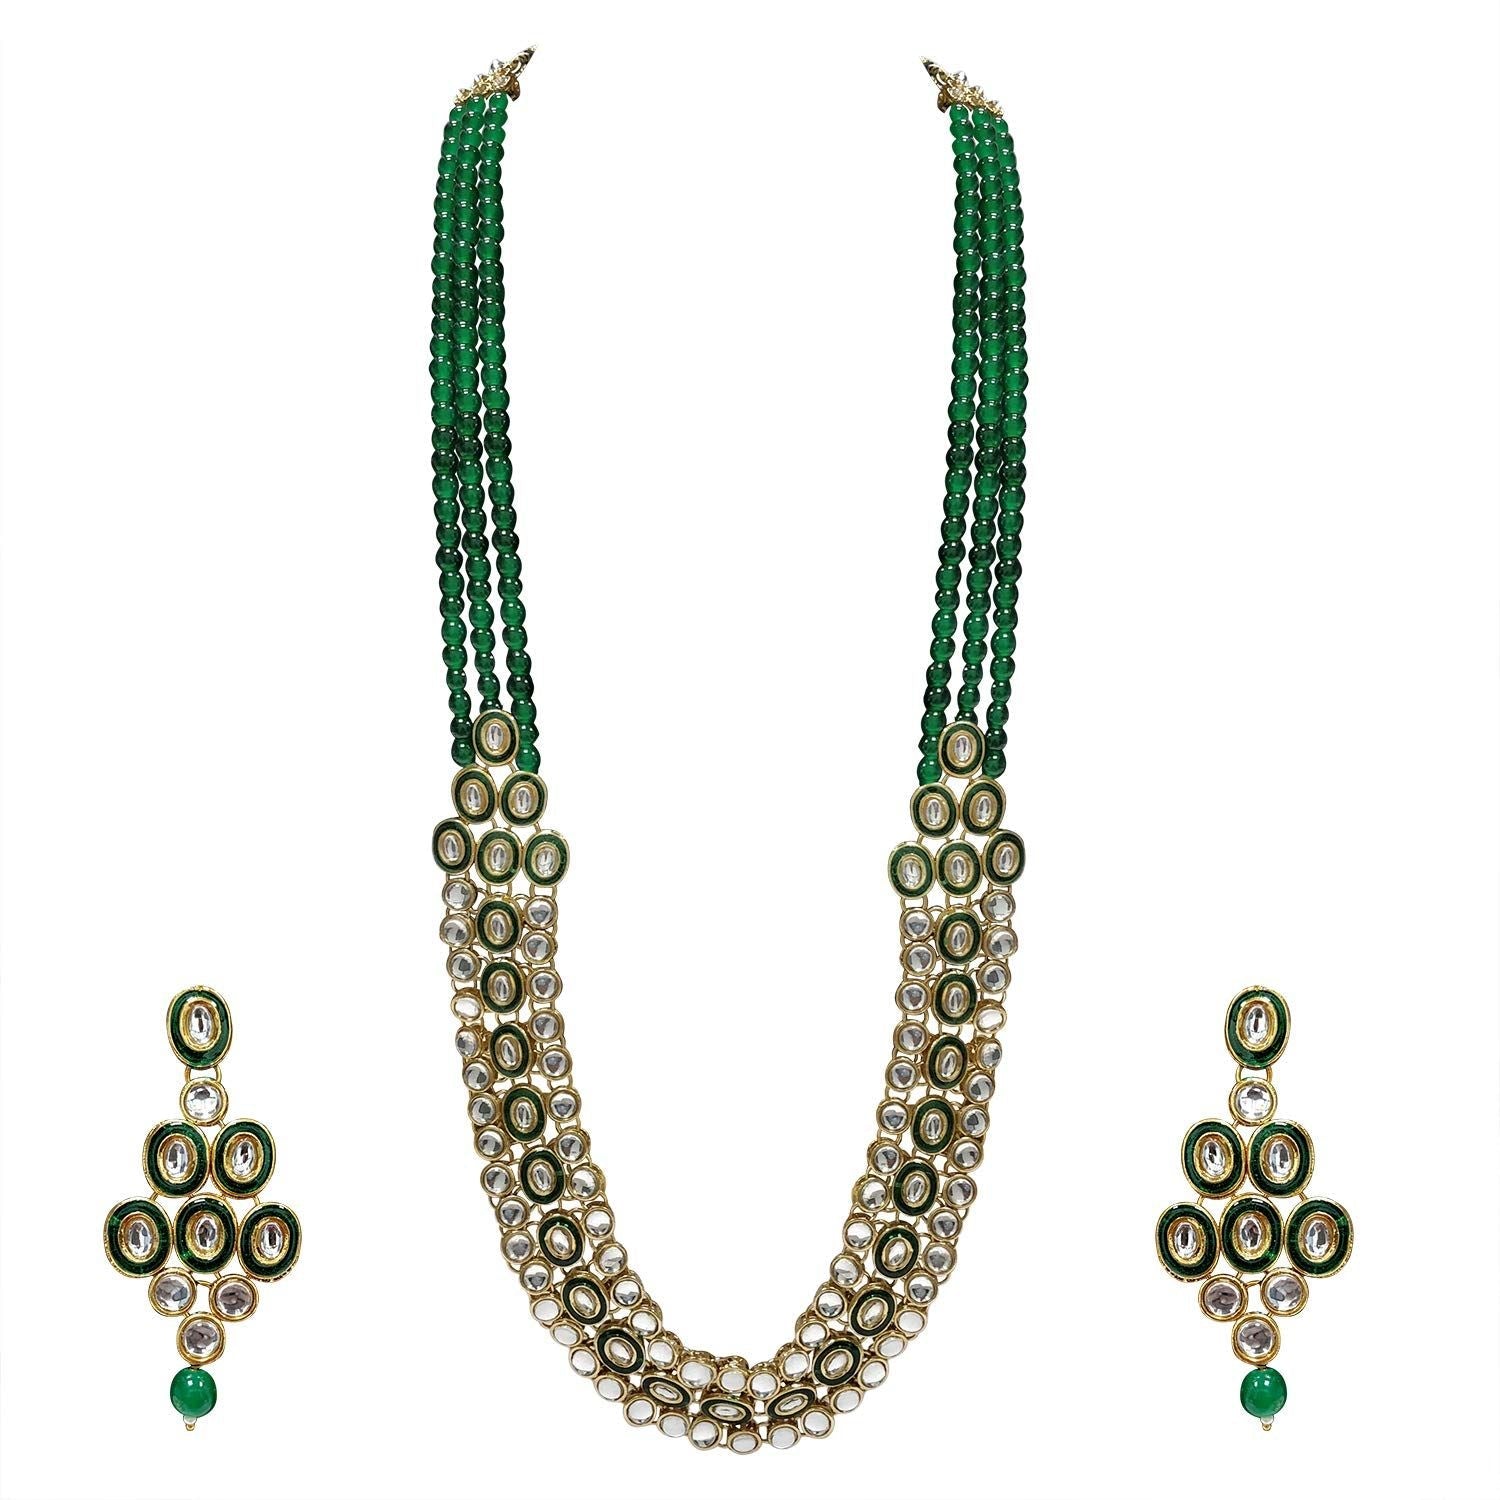 Women's 18K Gold Plated Traditional Stunning Green Meenakari Kundan Studded Pearl Necklace Jewellery Set with Earrings  - I Jewels